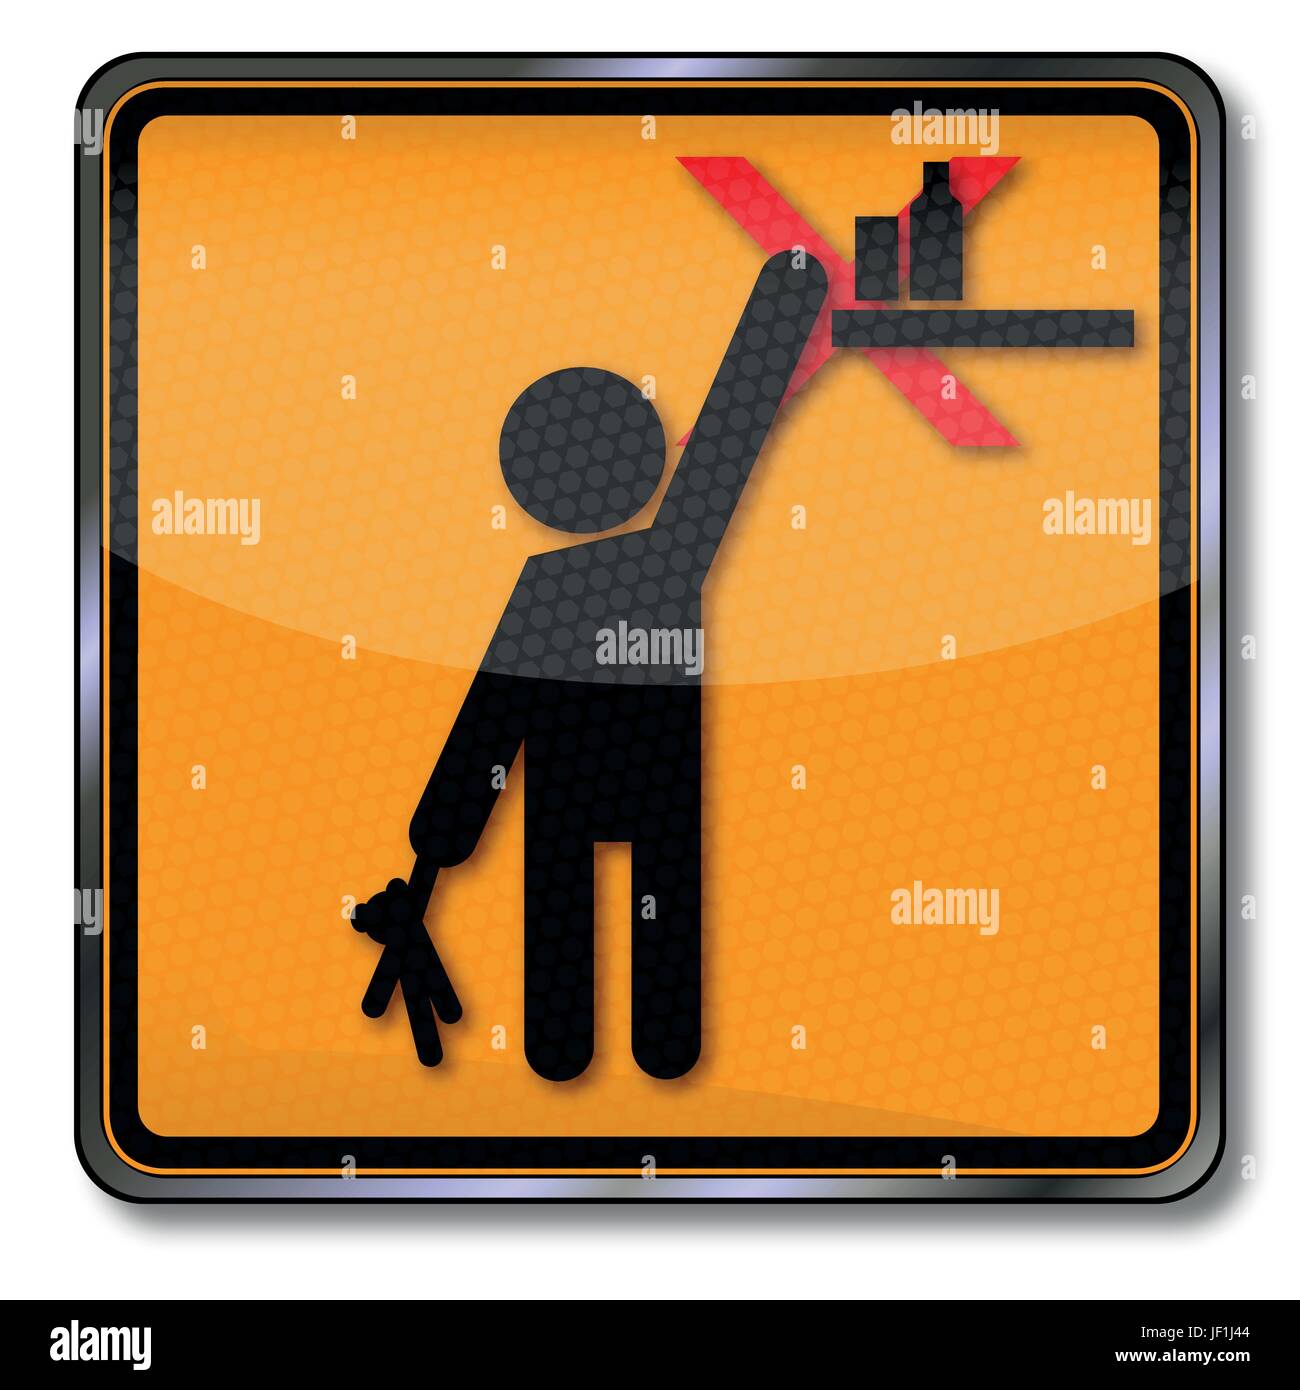 danger signs attention product please keep in front of reach of children Stock Vector